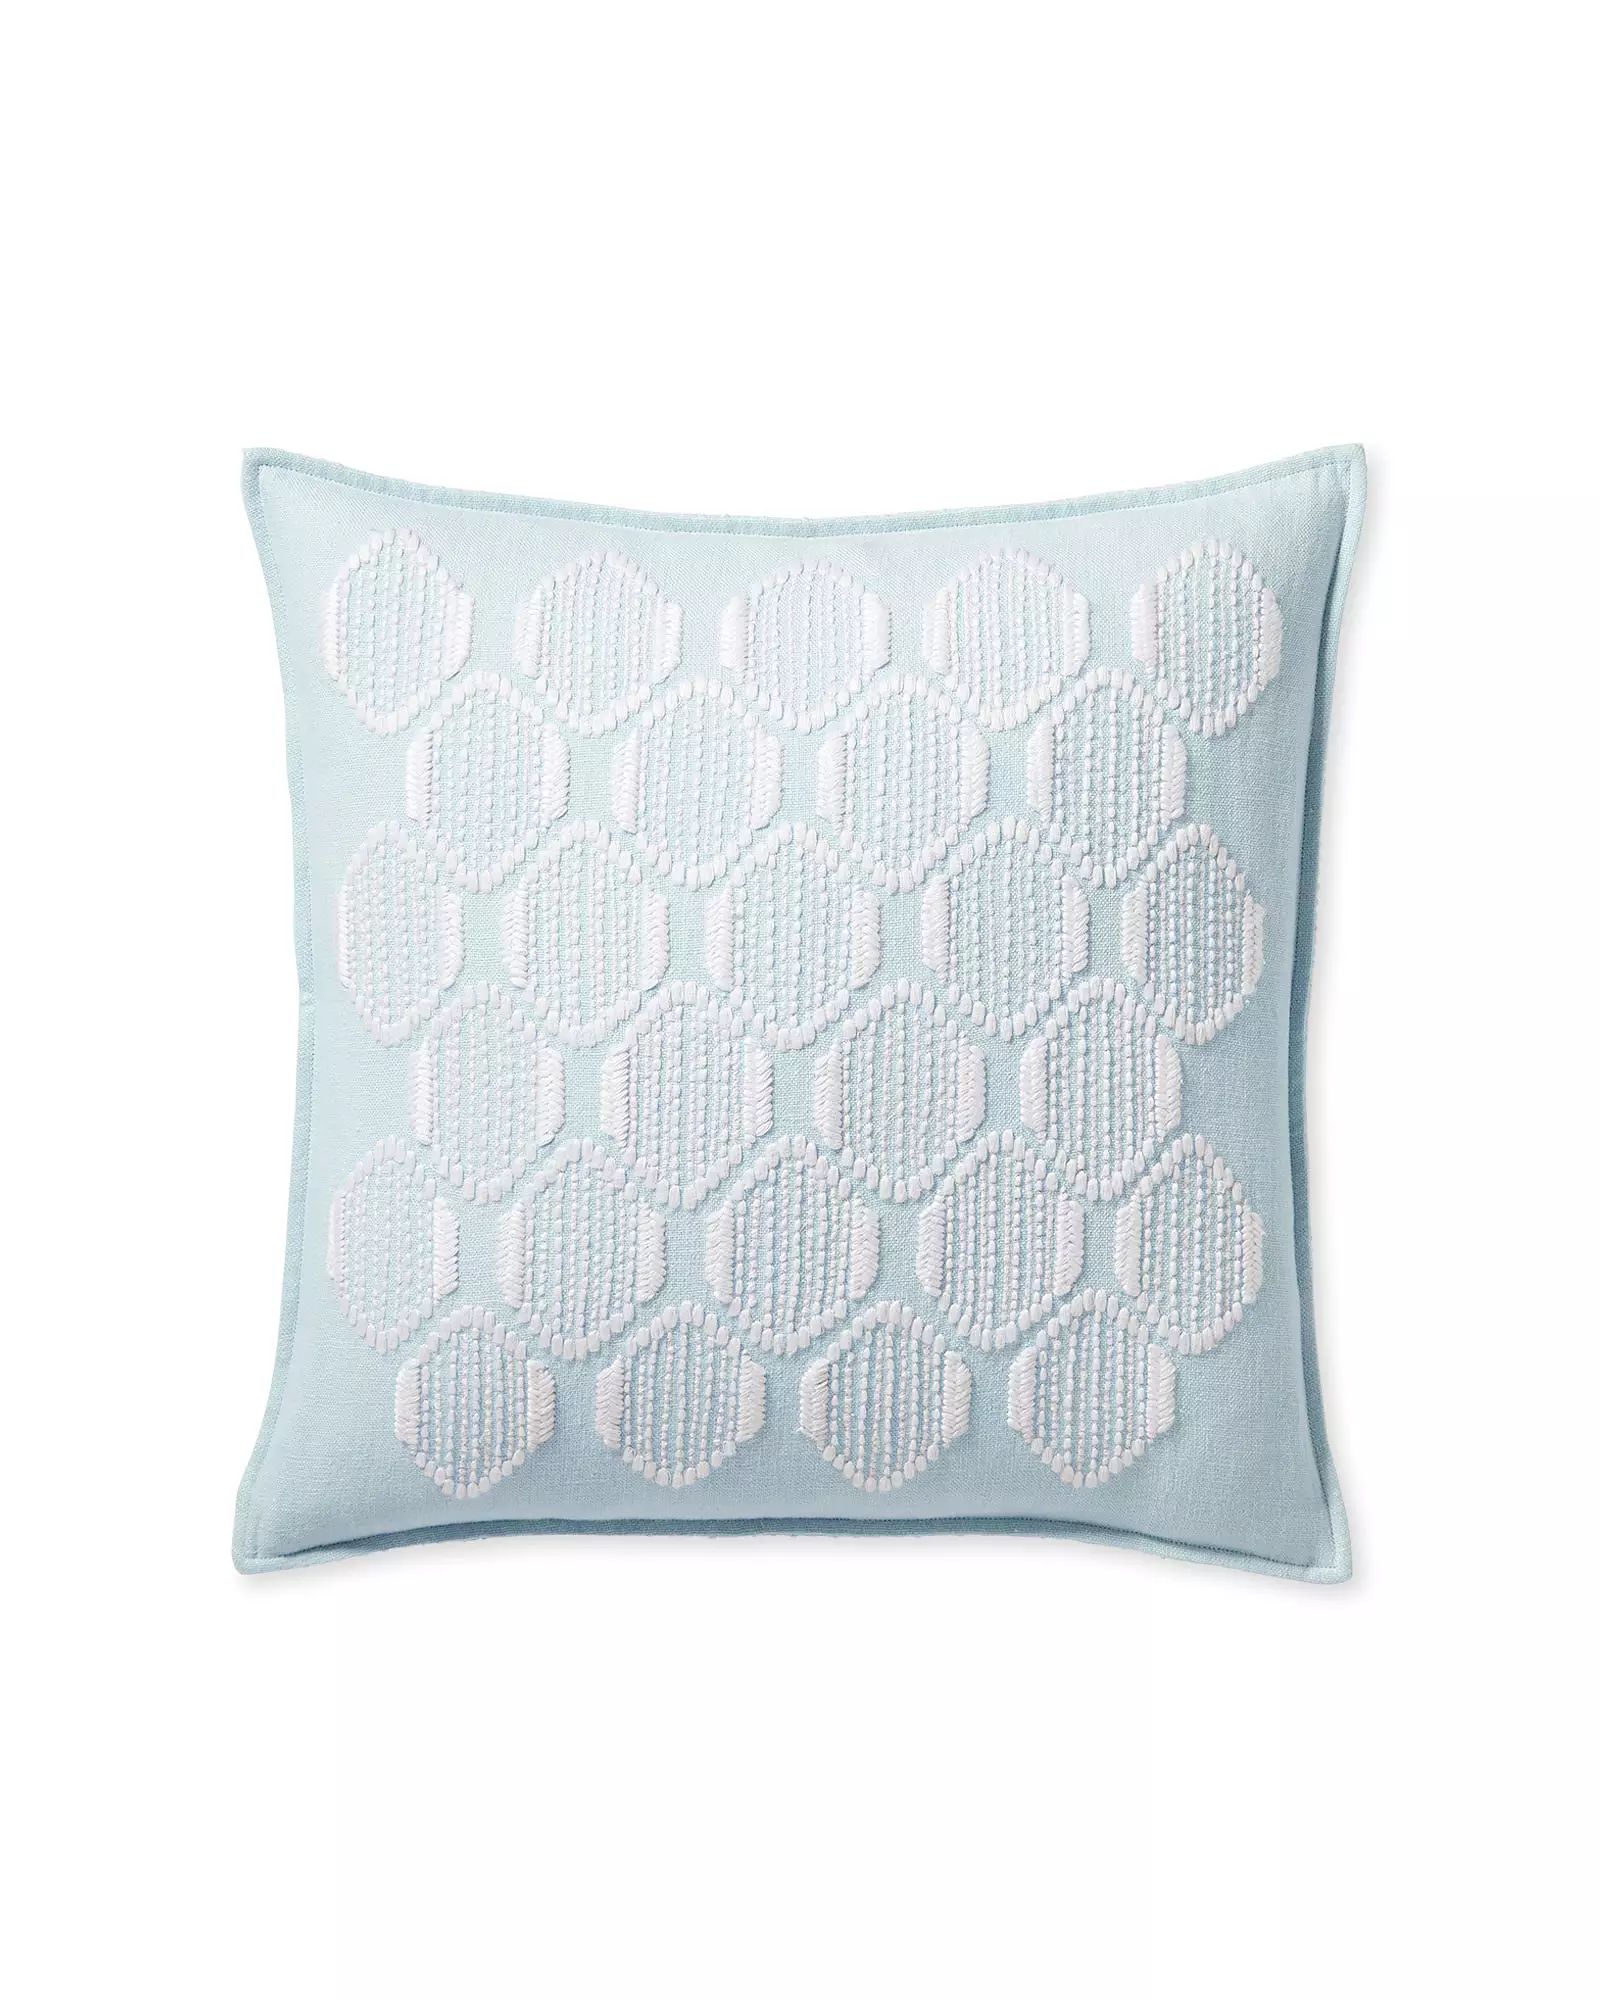 Capraia Pillow Cover | Serena and Lily